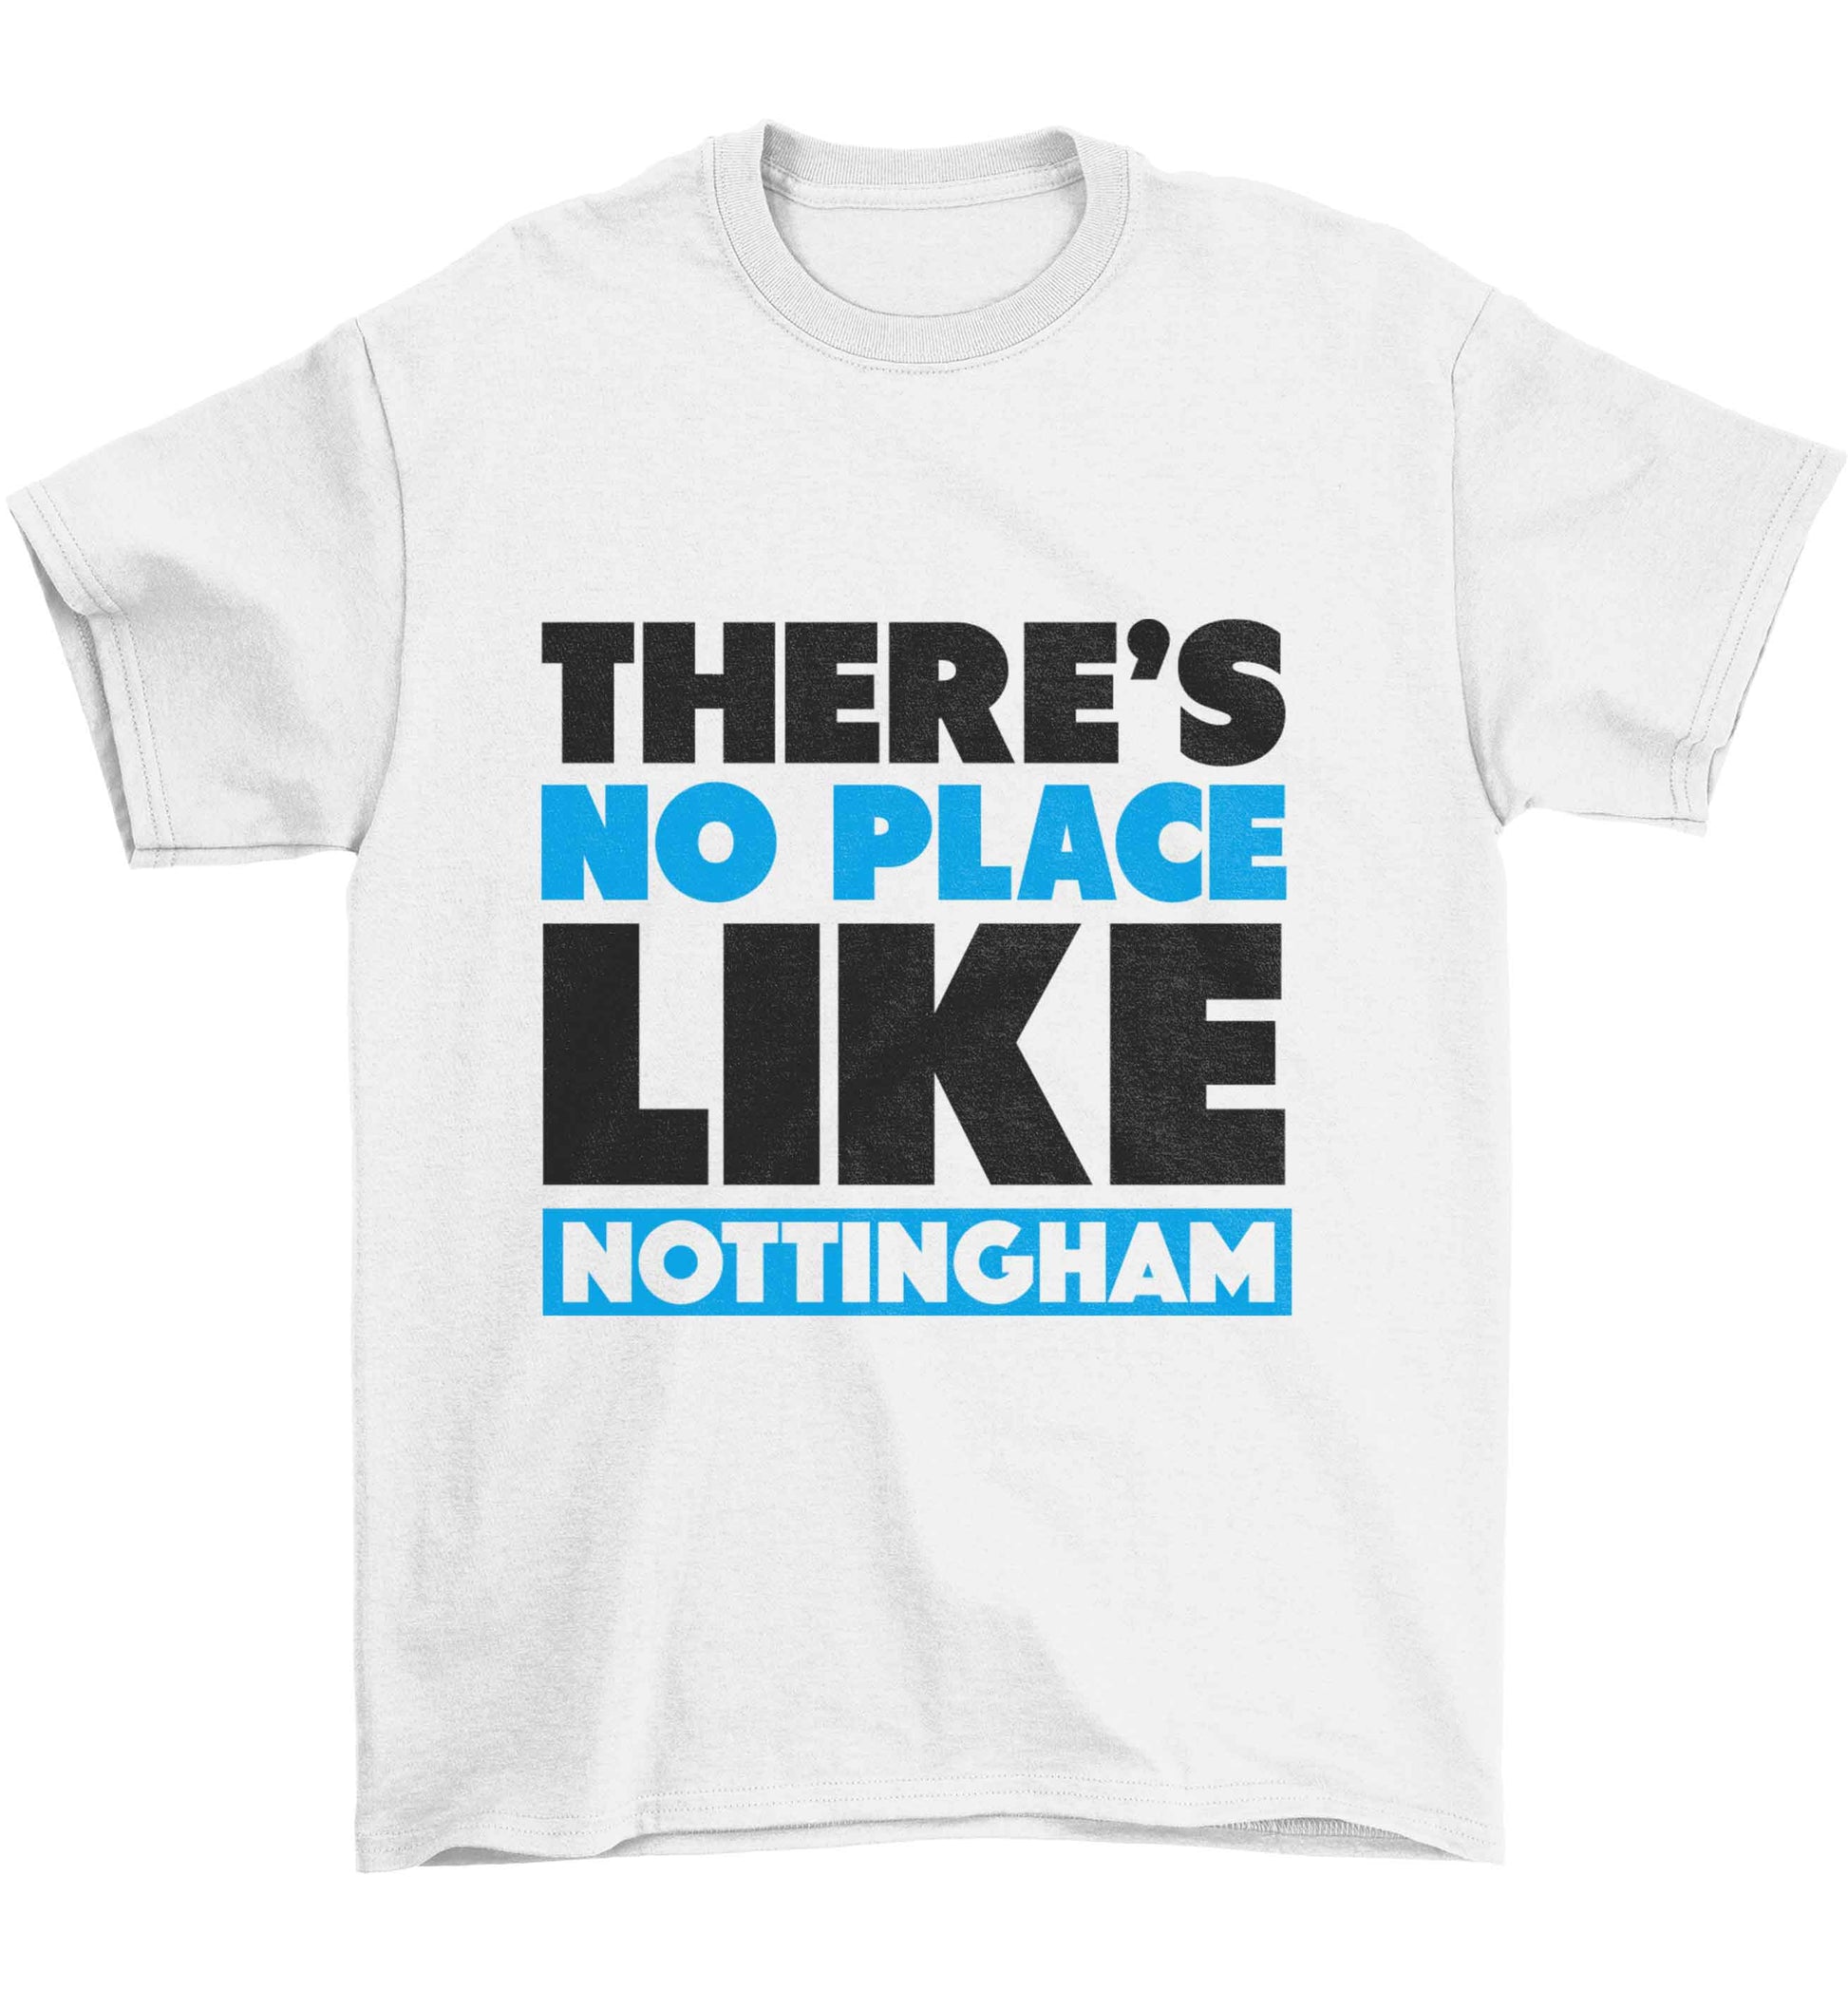 There's no place like Nottingham Children's white Tshirt 12-13 Years